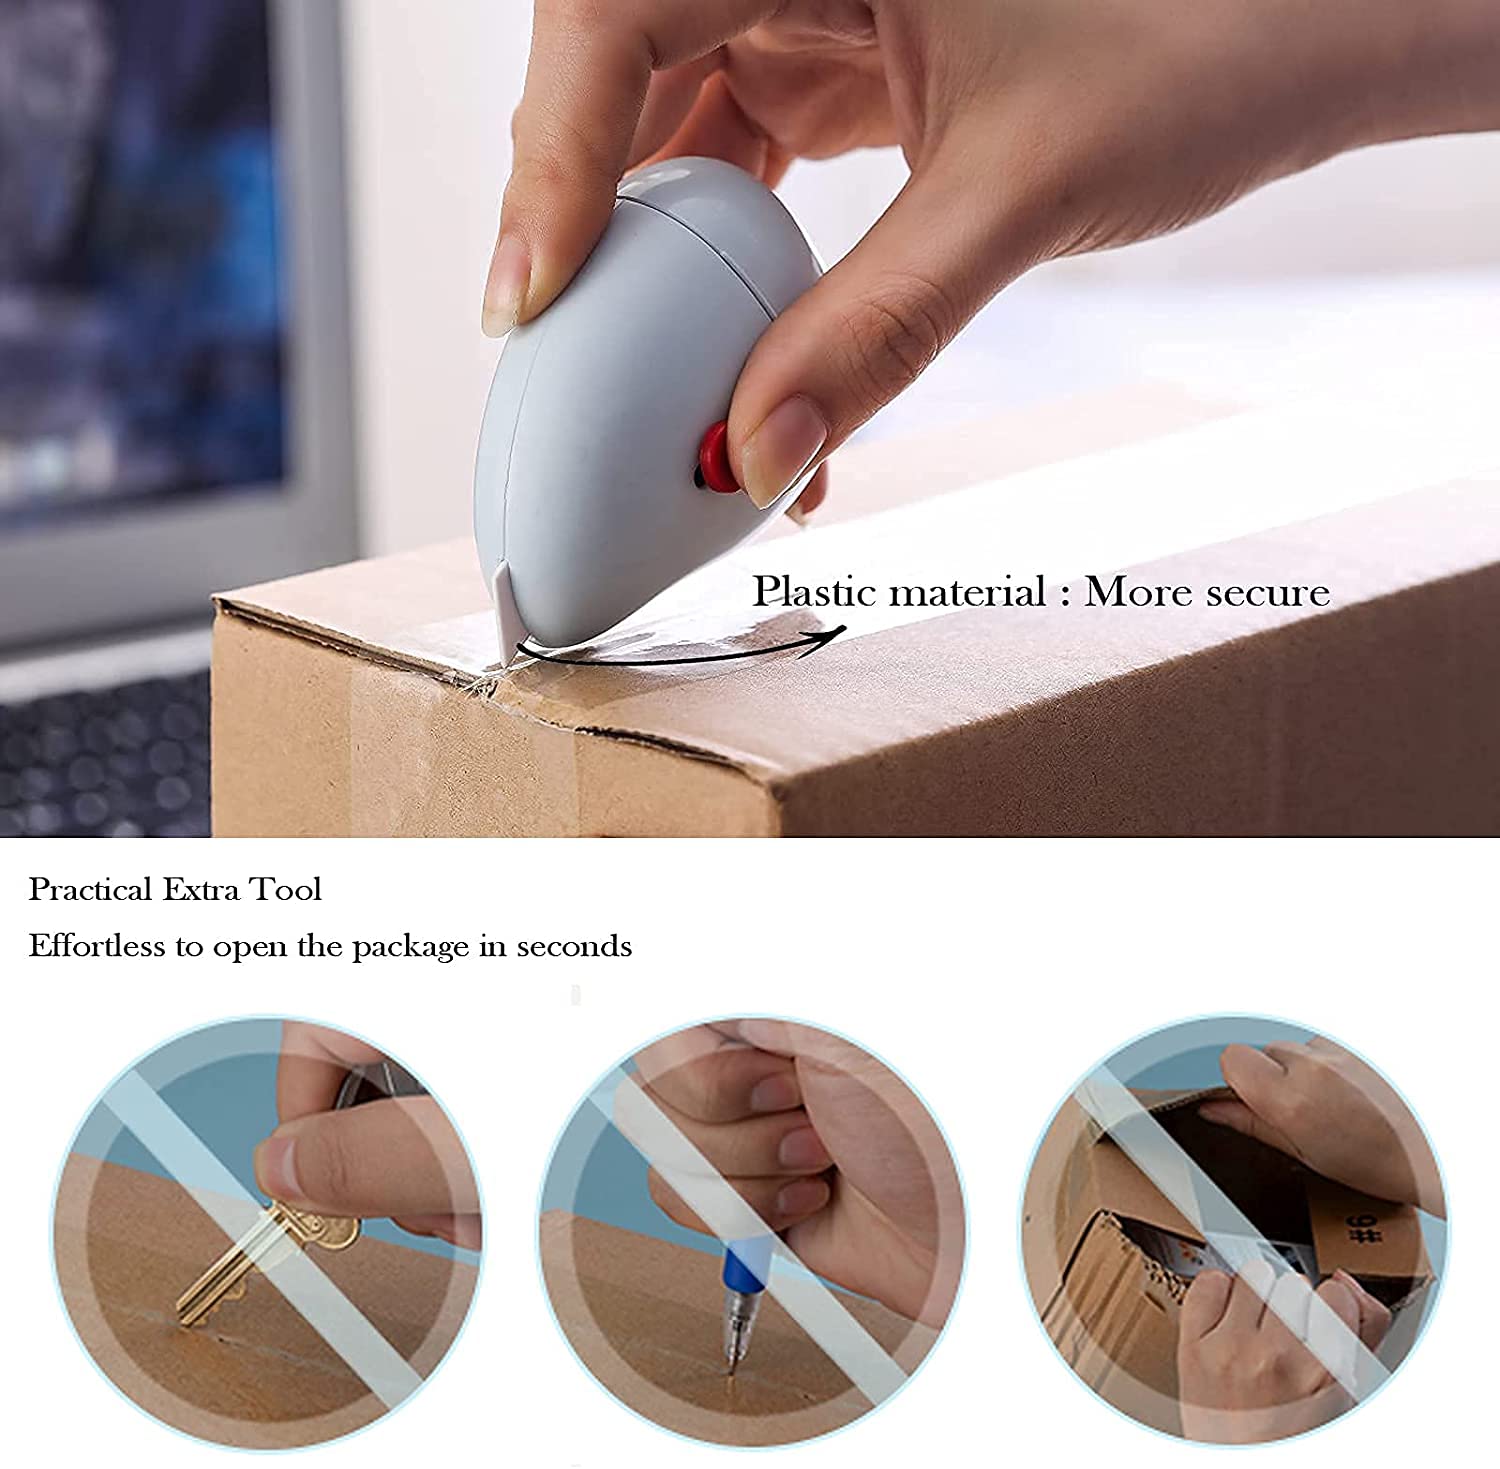 SkyShopy Identity Protection Roller Stamp Guard Your ID Stamp Roller with Cutting Tool Designed for Anti-Theft, Protect Your Confidential Address, Bank Statement, Personal Privacy